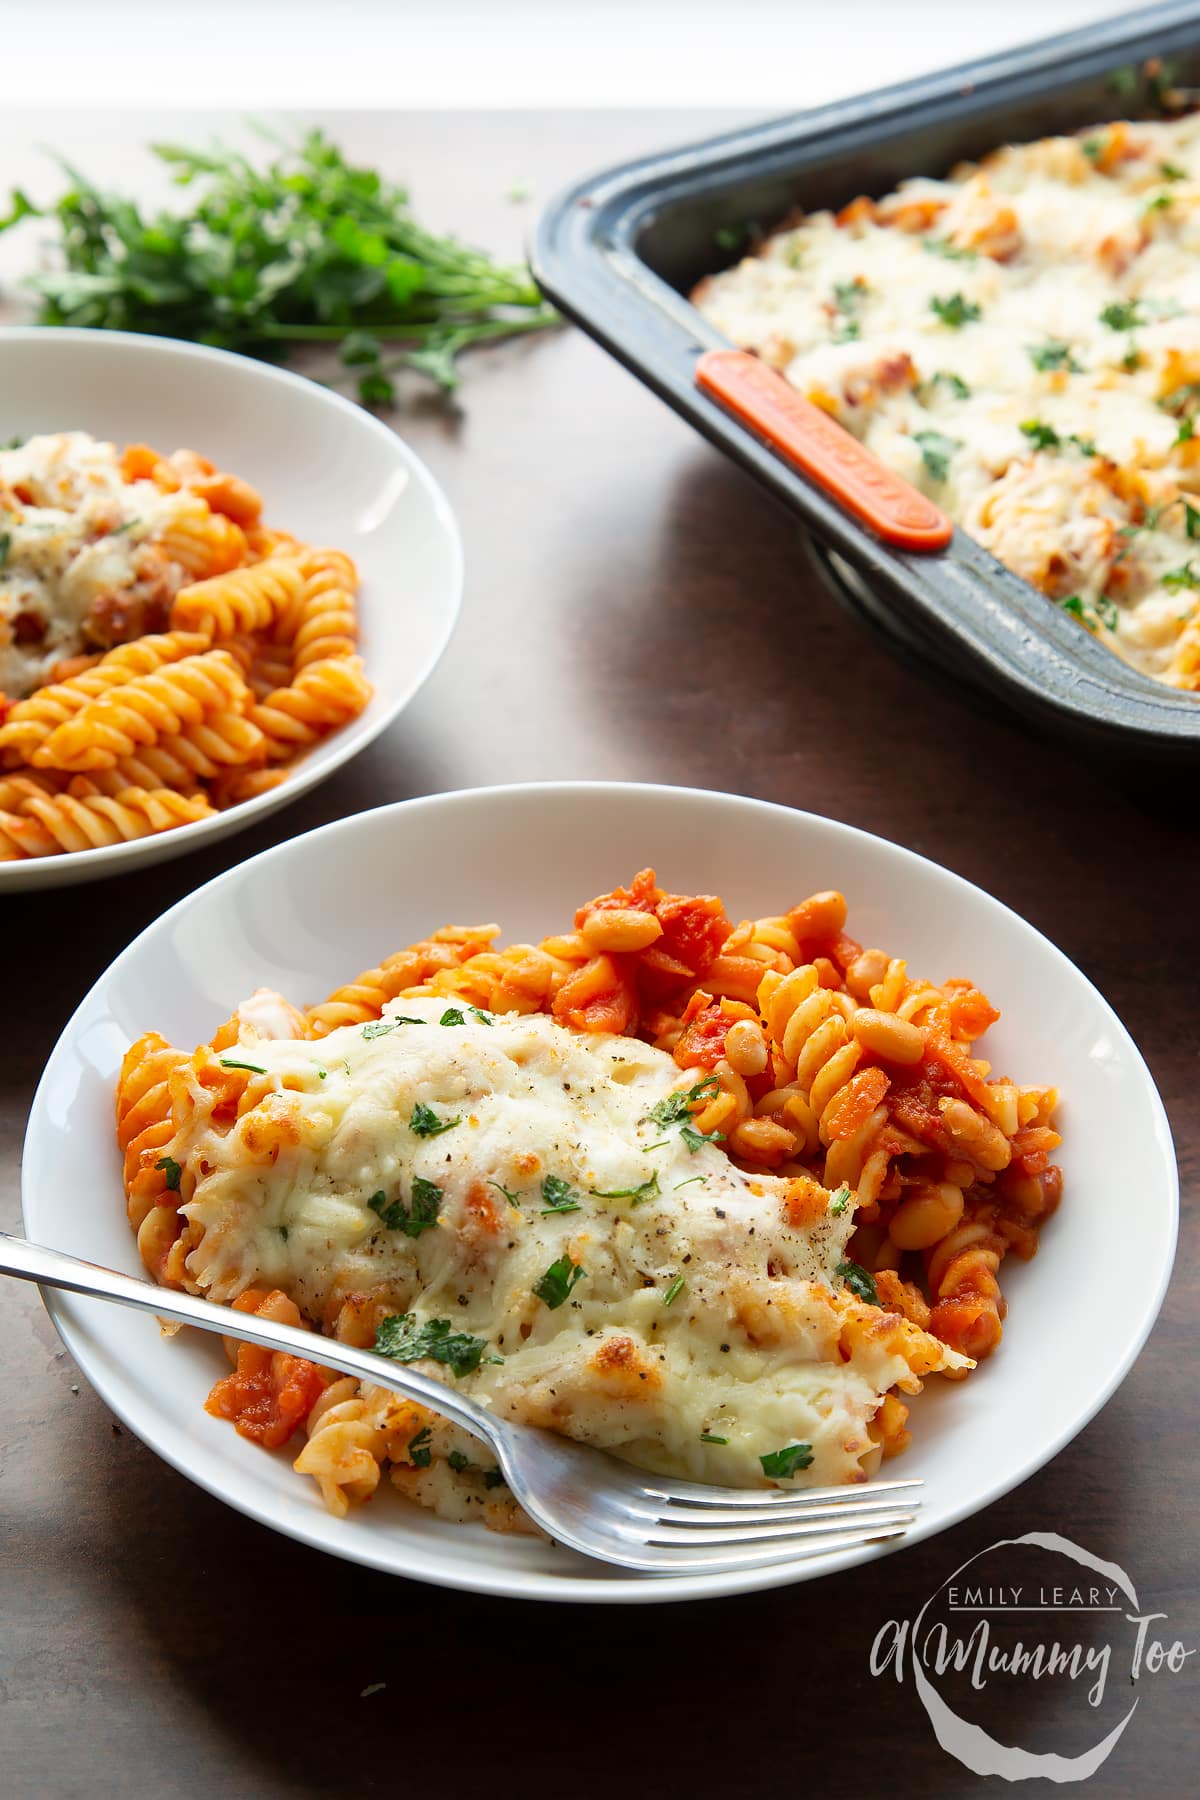 Pasta and baked beans served to white bowls with melted mozzarella. The tray of pasta bake is shown in the background